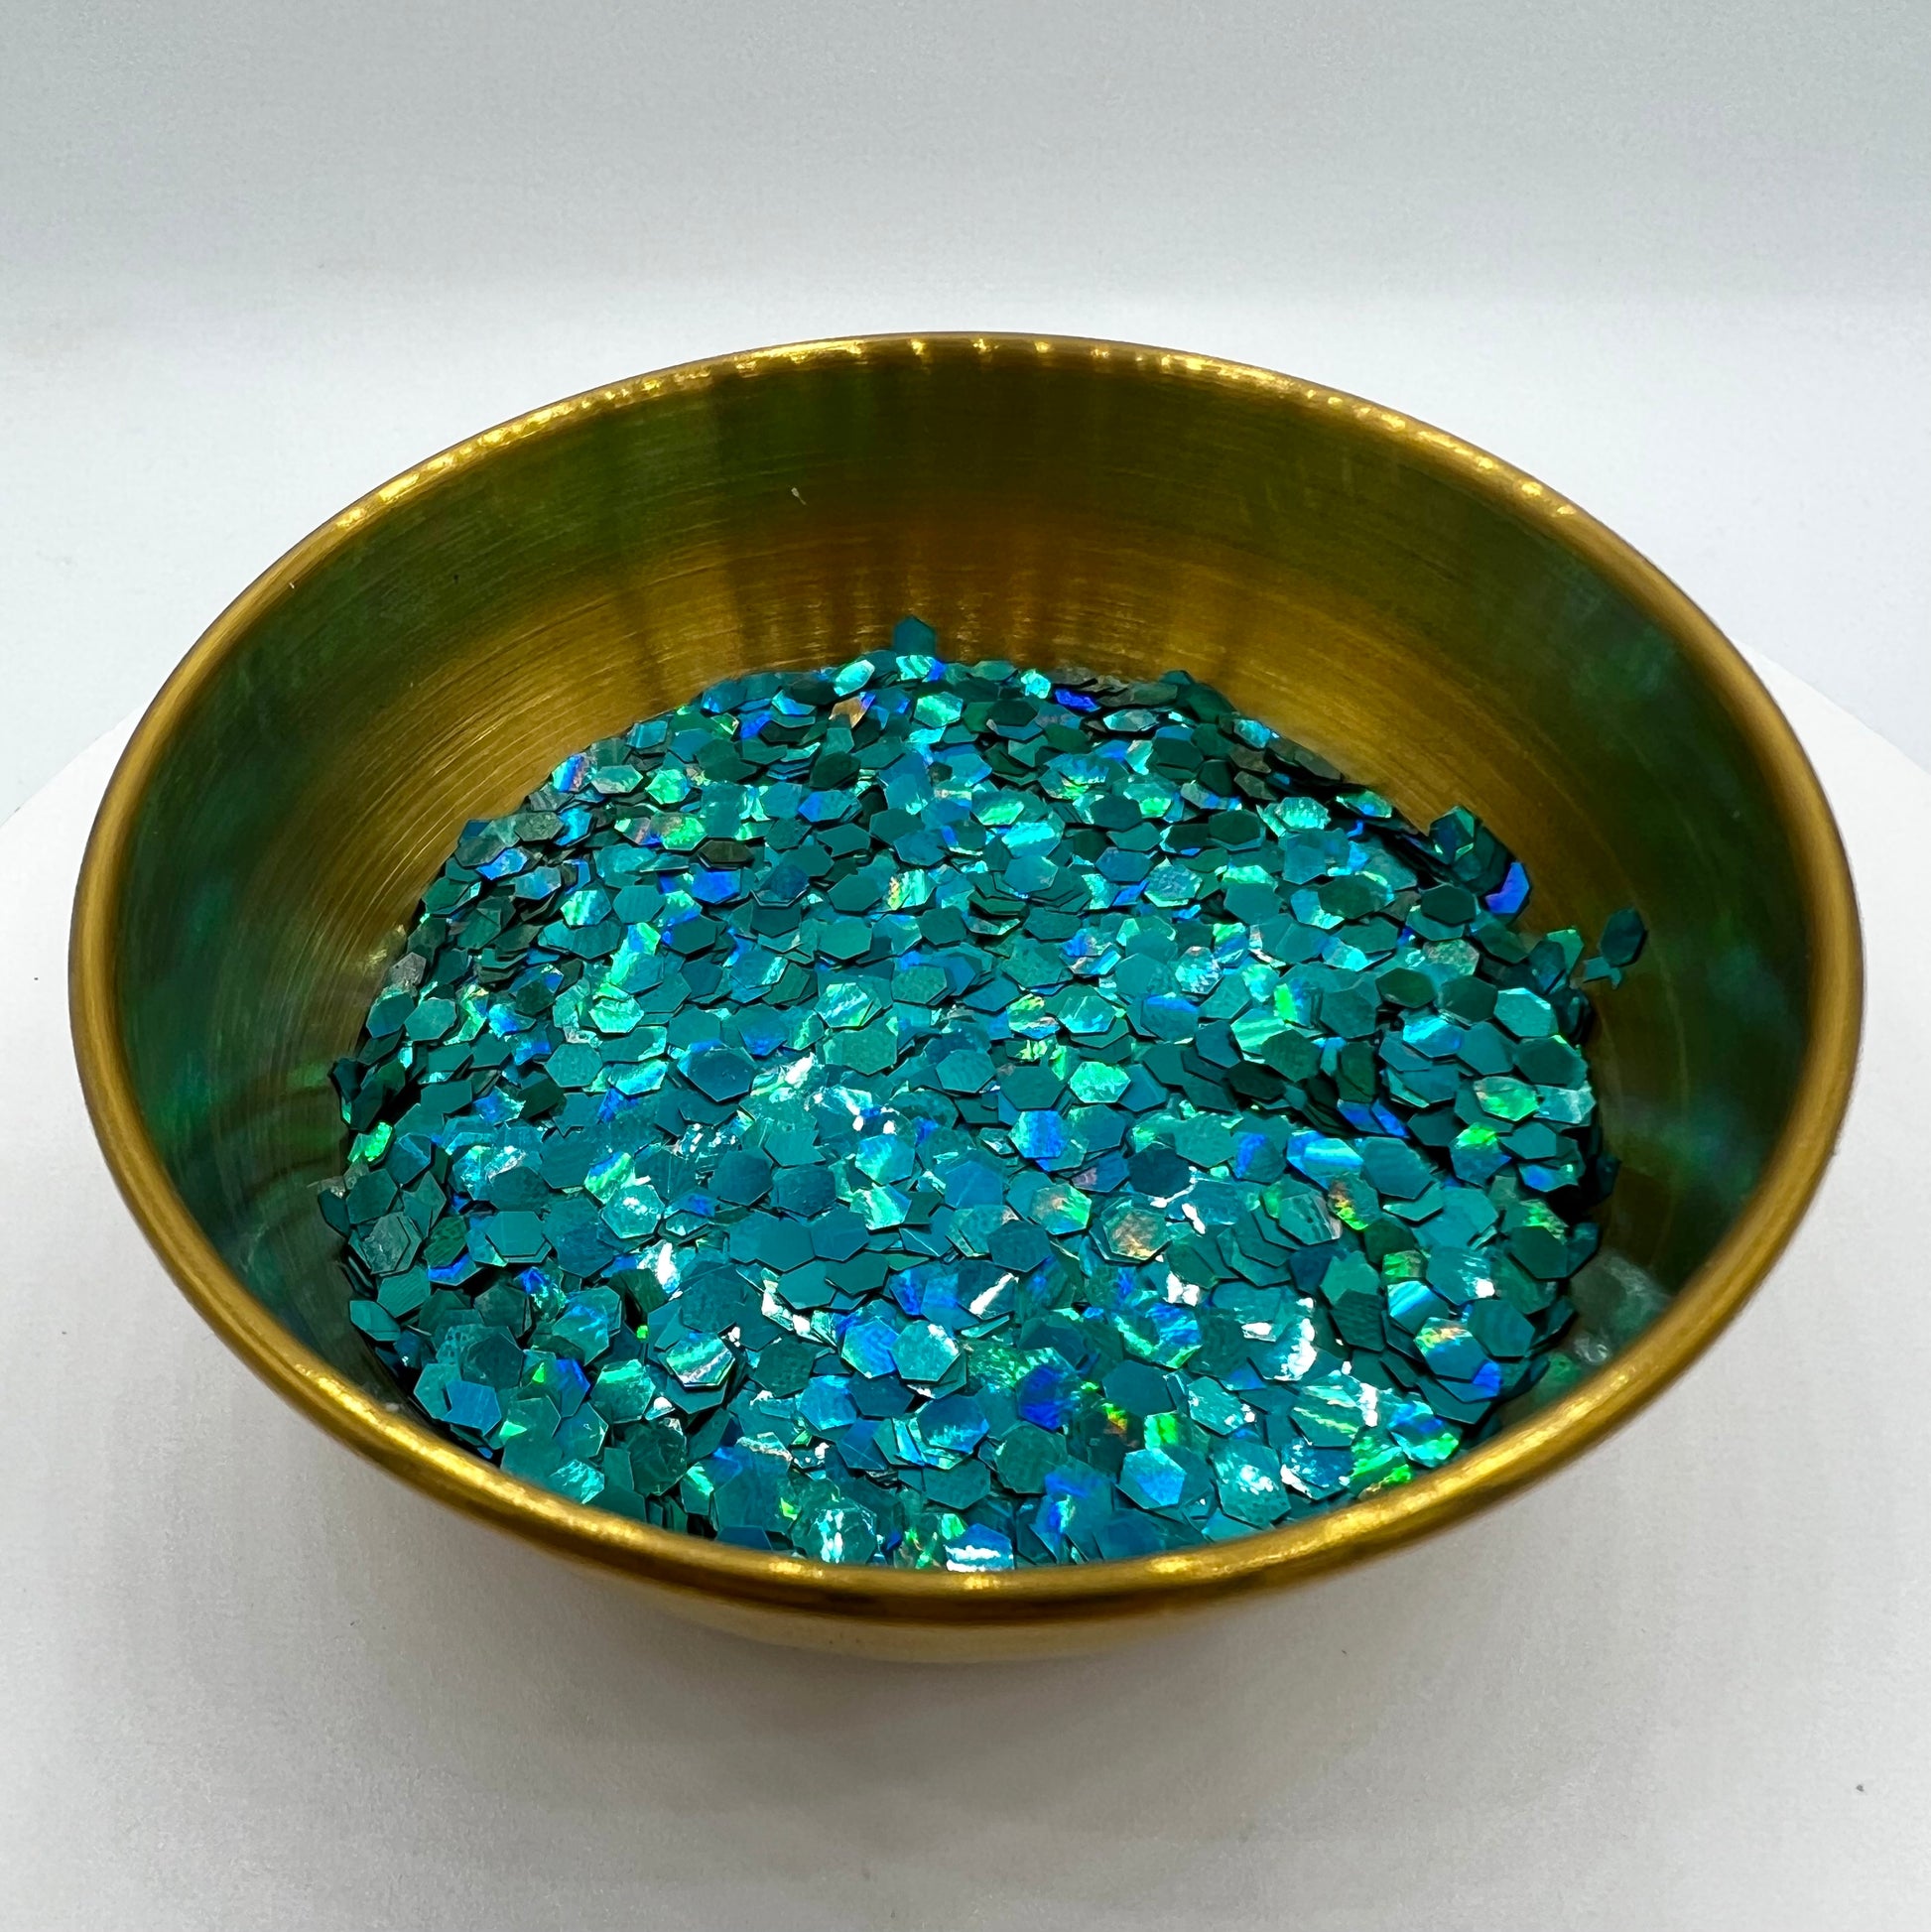 Ariel’s Dream Tail Super Chunky Holographic Turquoise Biodegradable Glitter